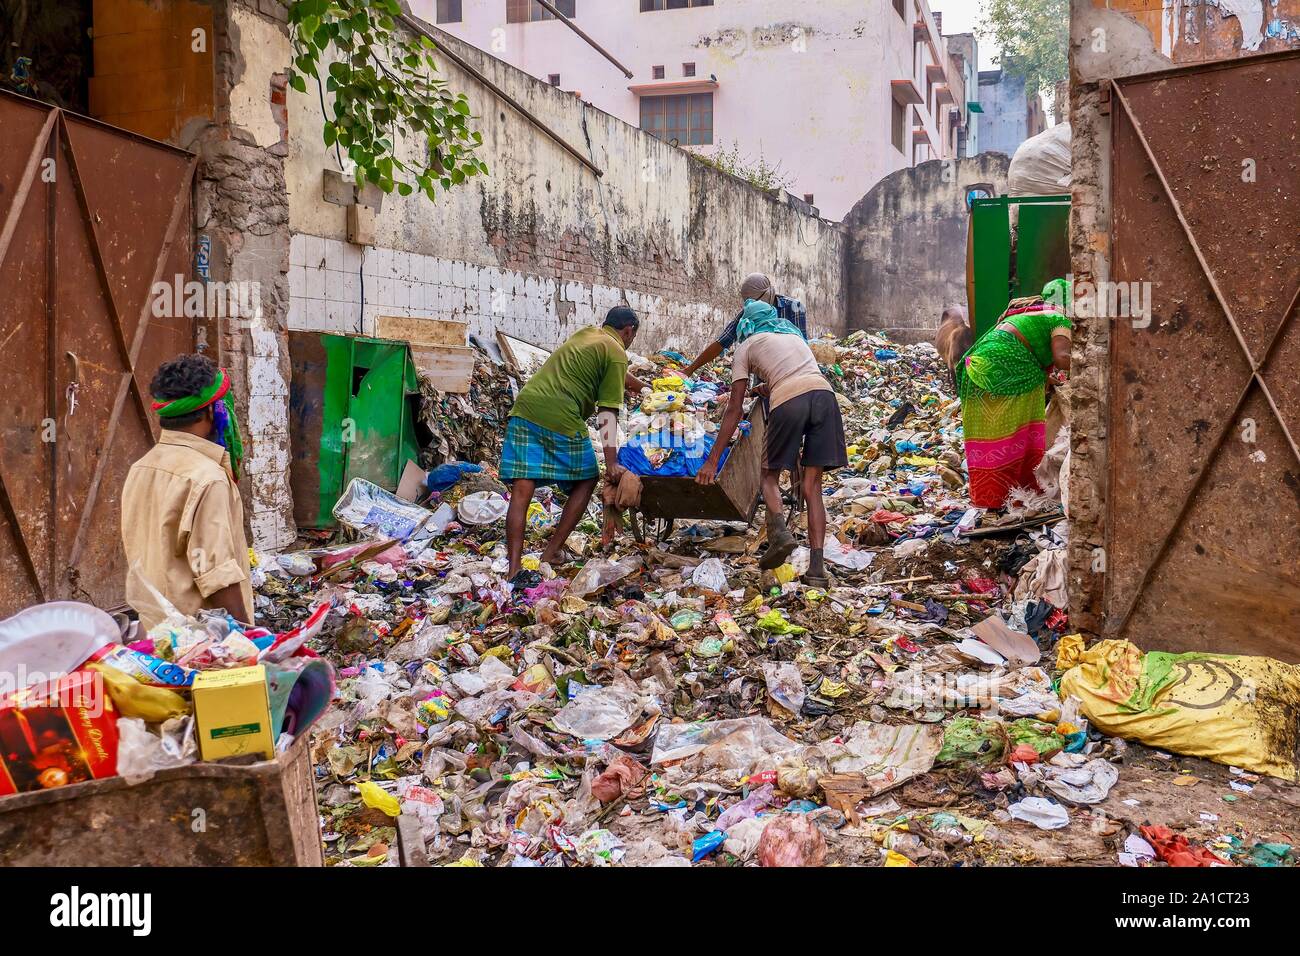 Garbage being dumped and stored in a vacant downtown city lot in Varanasi, India, which raises issues of waste management and public health. Stock Photo